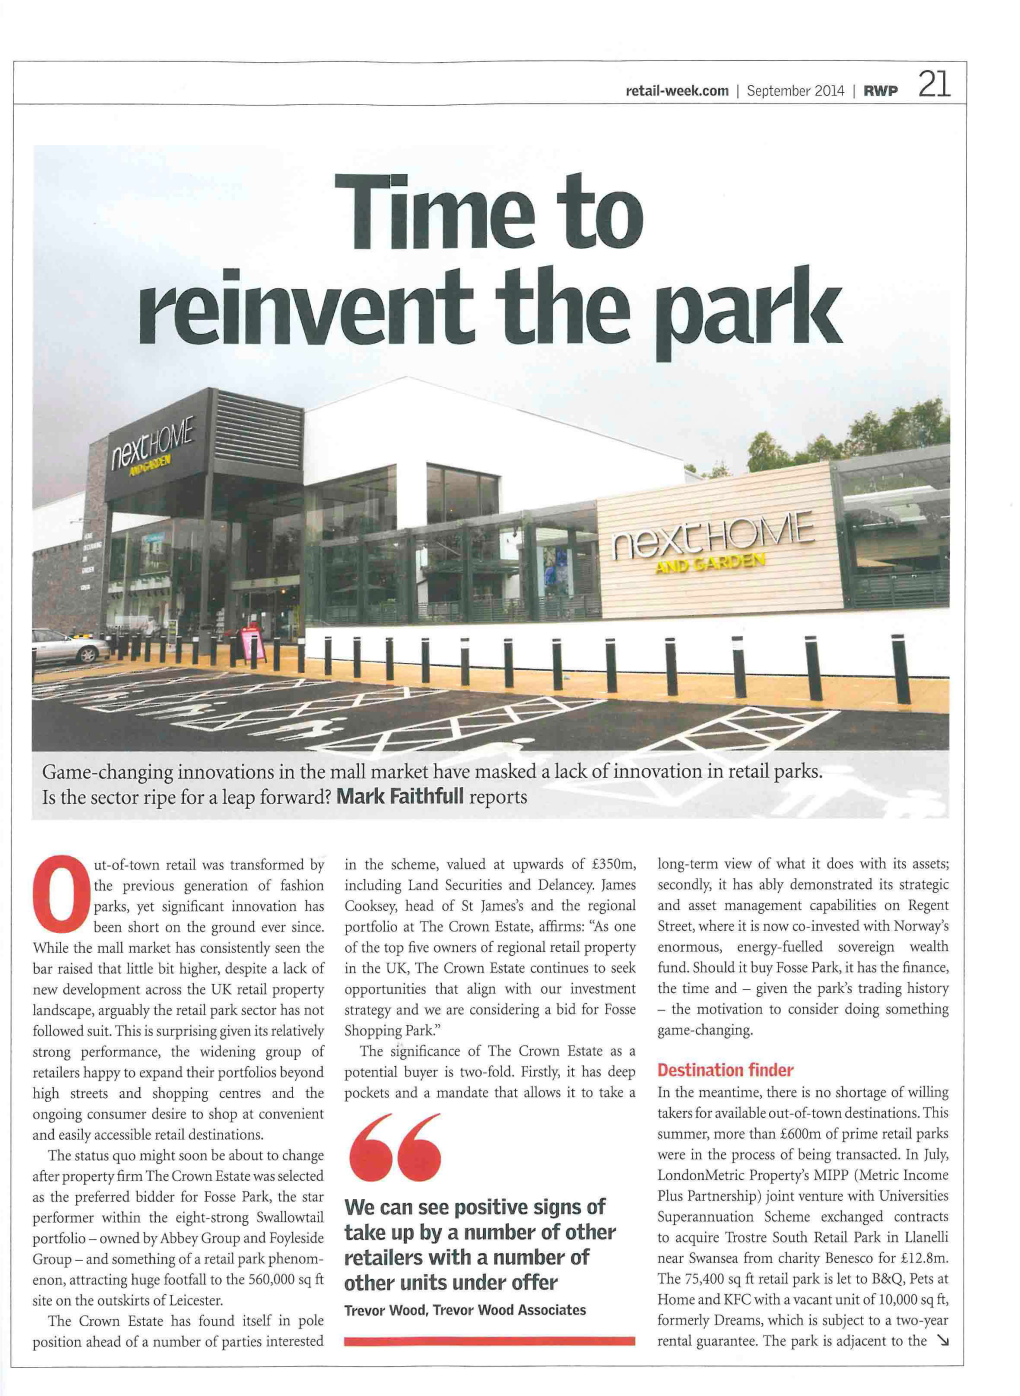 Time to Reinvent the Park